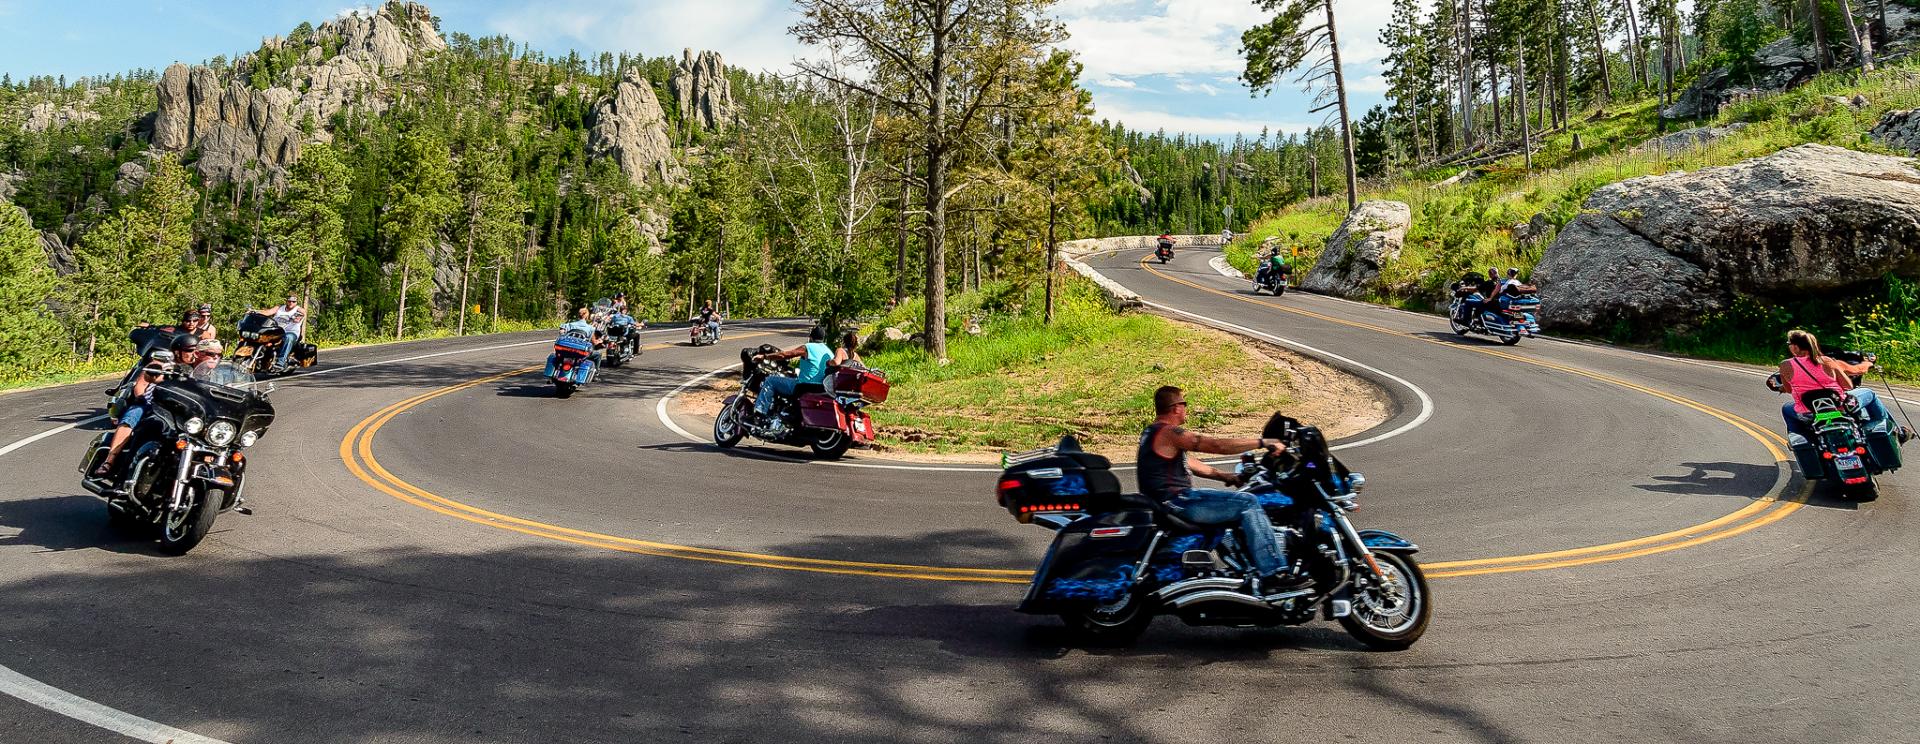 81st Annual Sturgis Motorcycle Rally. Black Hills & Badlands